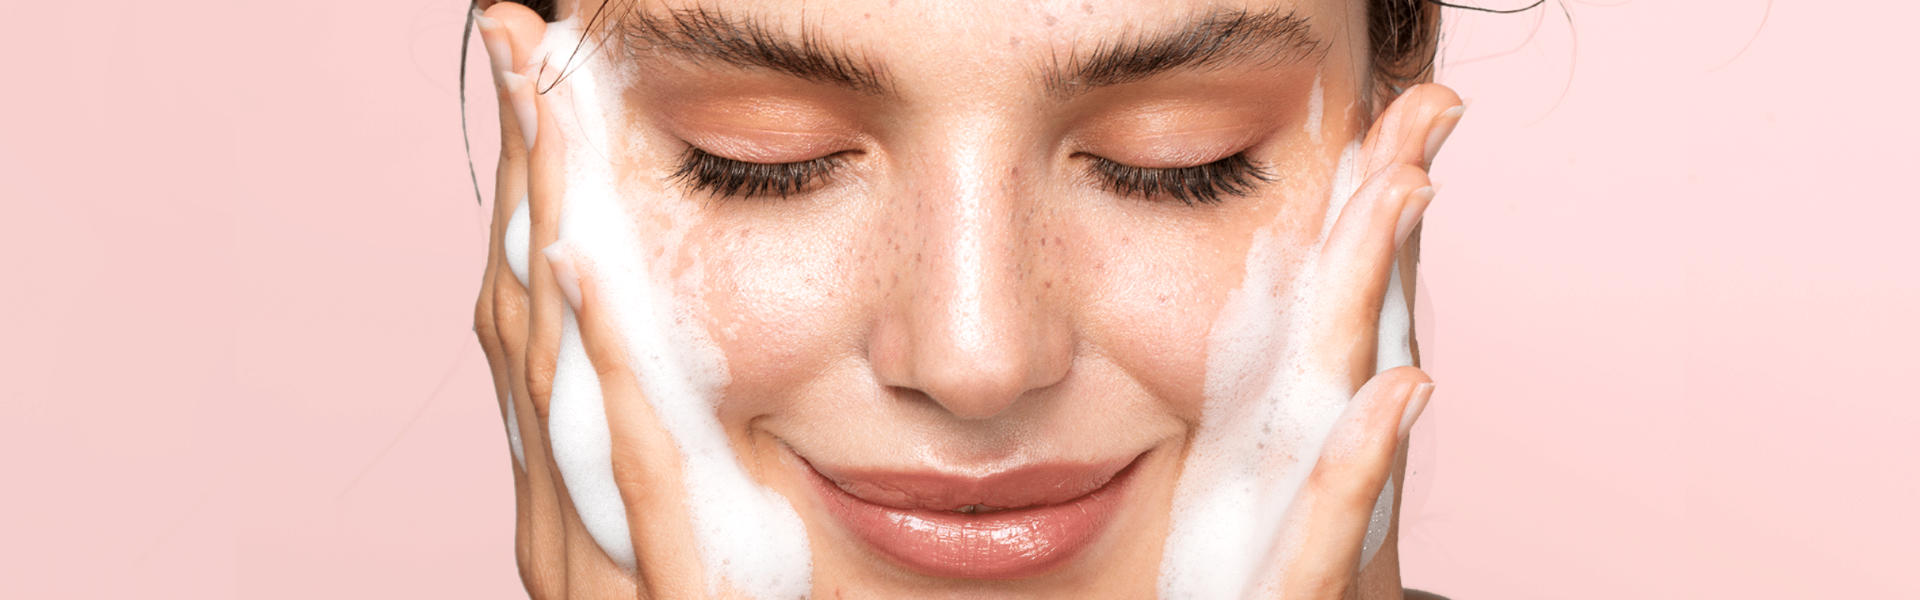 Here’s why your skincare regime is not working: Your skin type has changed